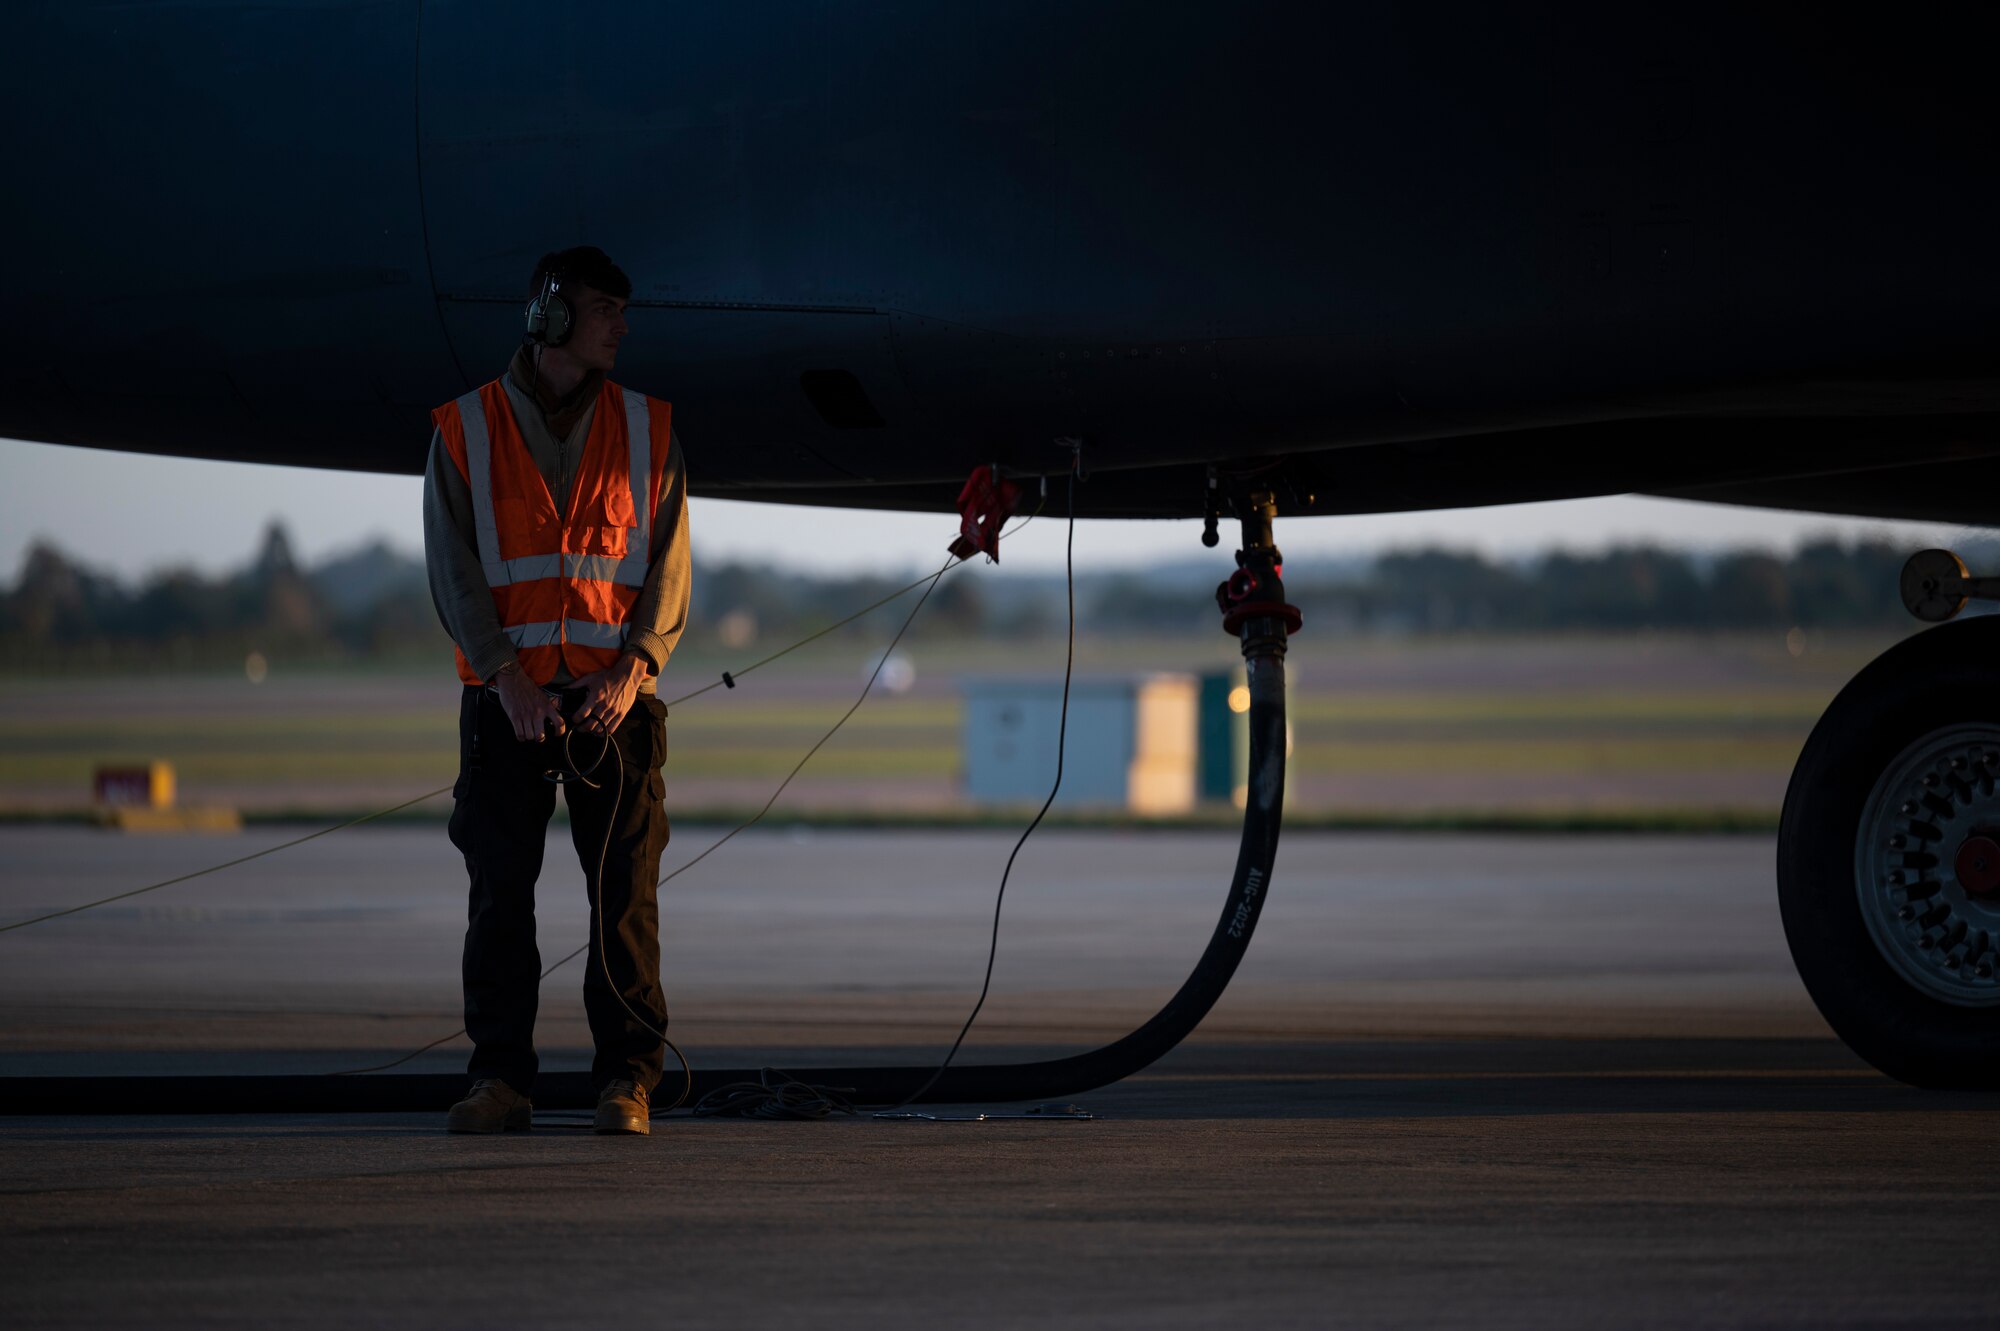 A fuels specialist assigned to the 9th Expeditionary Bomb Squadron, stands by while a B-1B Lancer is being refueled at RAF Fairford, United Kingdom, Oct 11, 2021. Fuels specialists support Bomber Task Force Europe missions by managing refueling operations necessary to support a variety of training exercises. (U.S. Air Force photo by Airman 1st Class Josiah Brown)